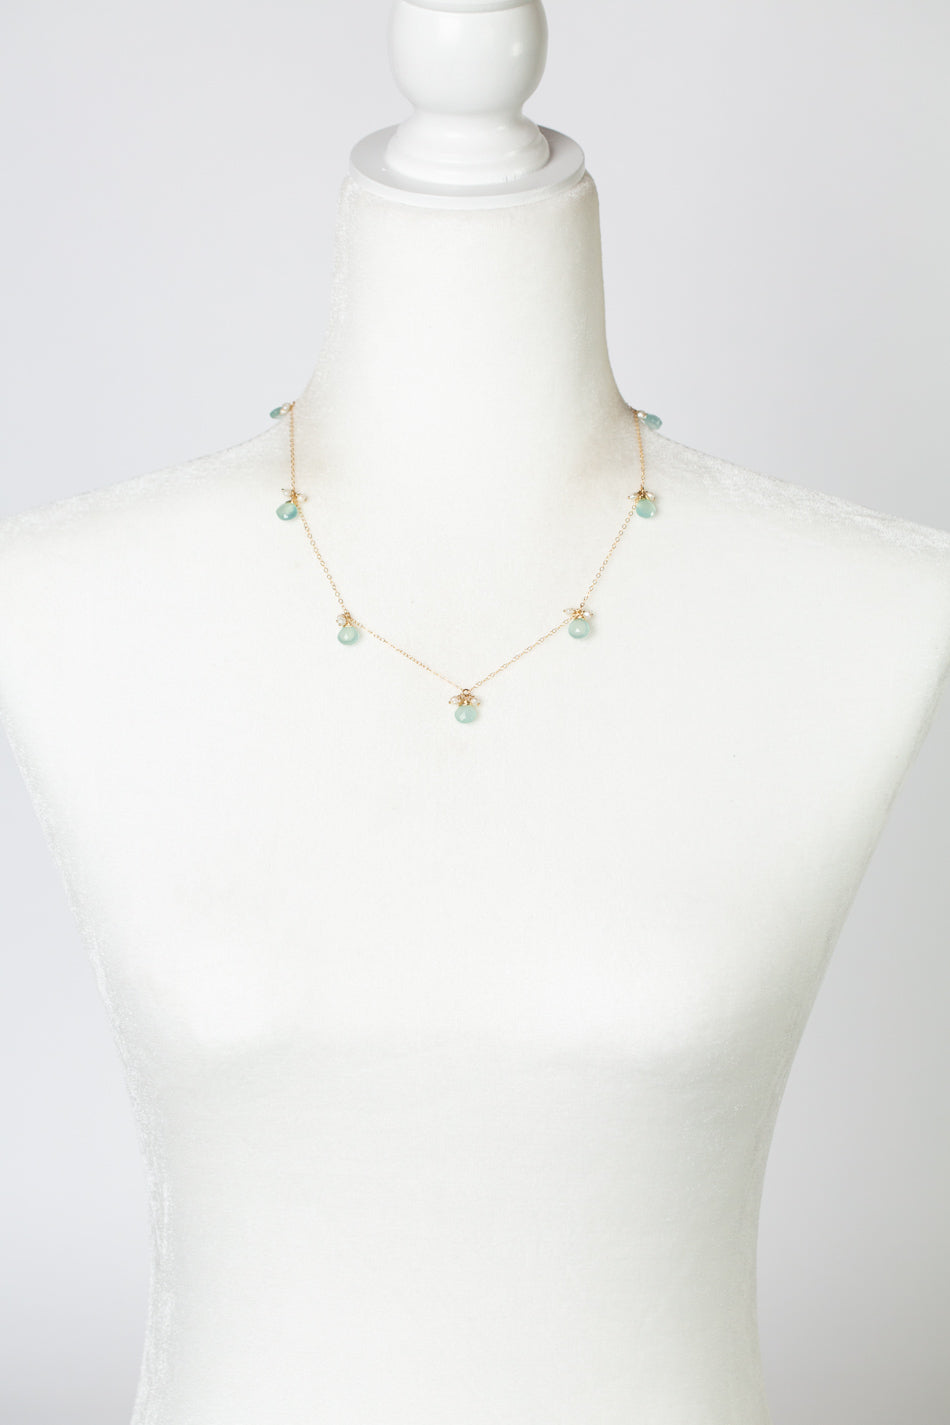 Limited Edition 17.5-19.5" Freshwater Pearl With Seafoam Blue/Green Chalcedony Briolettes Simple Necklace